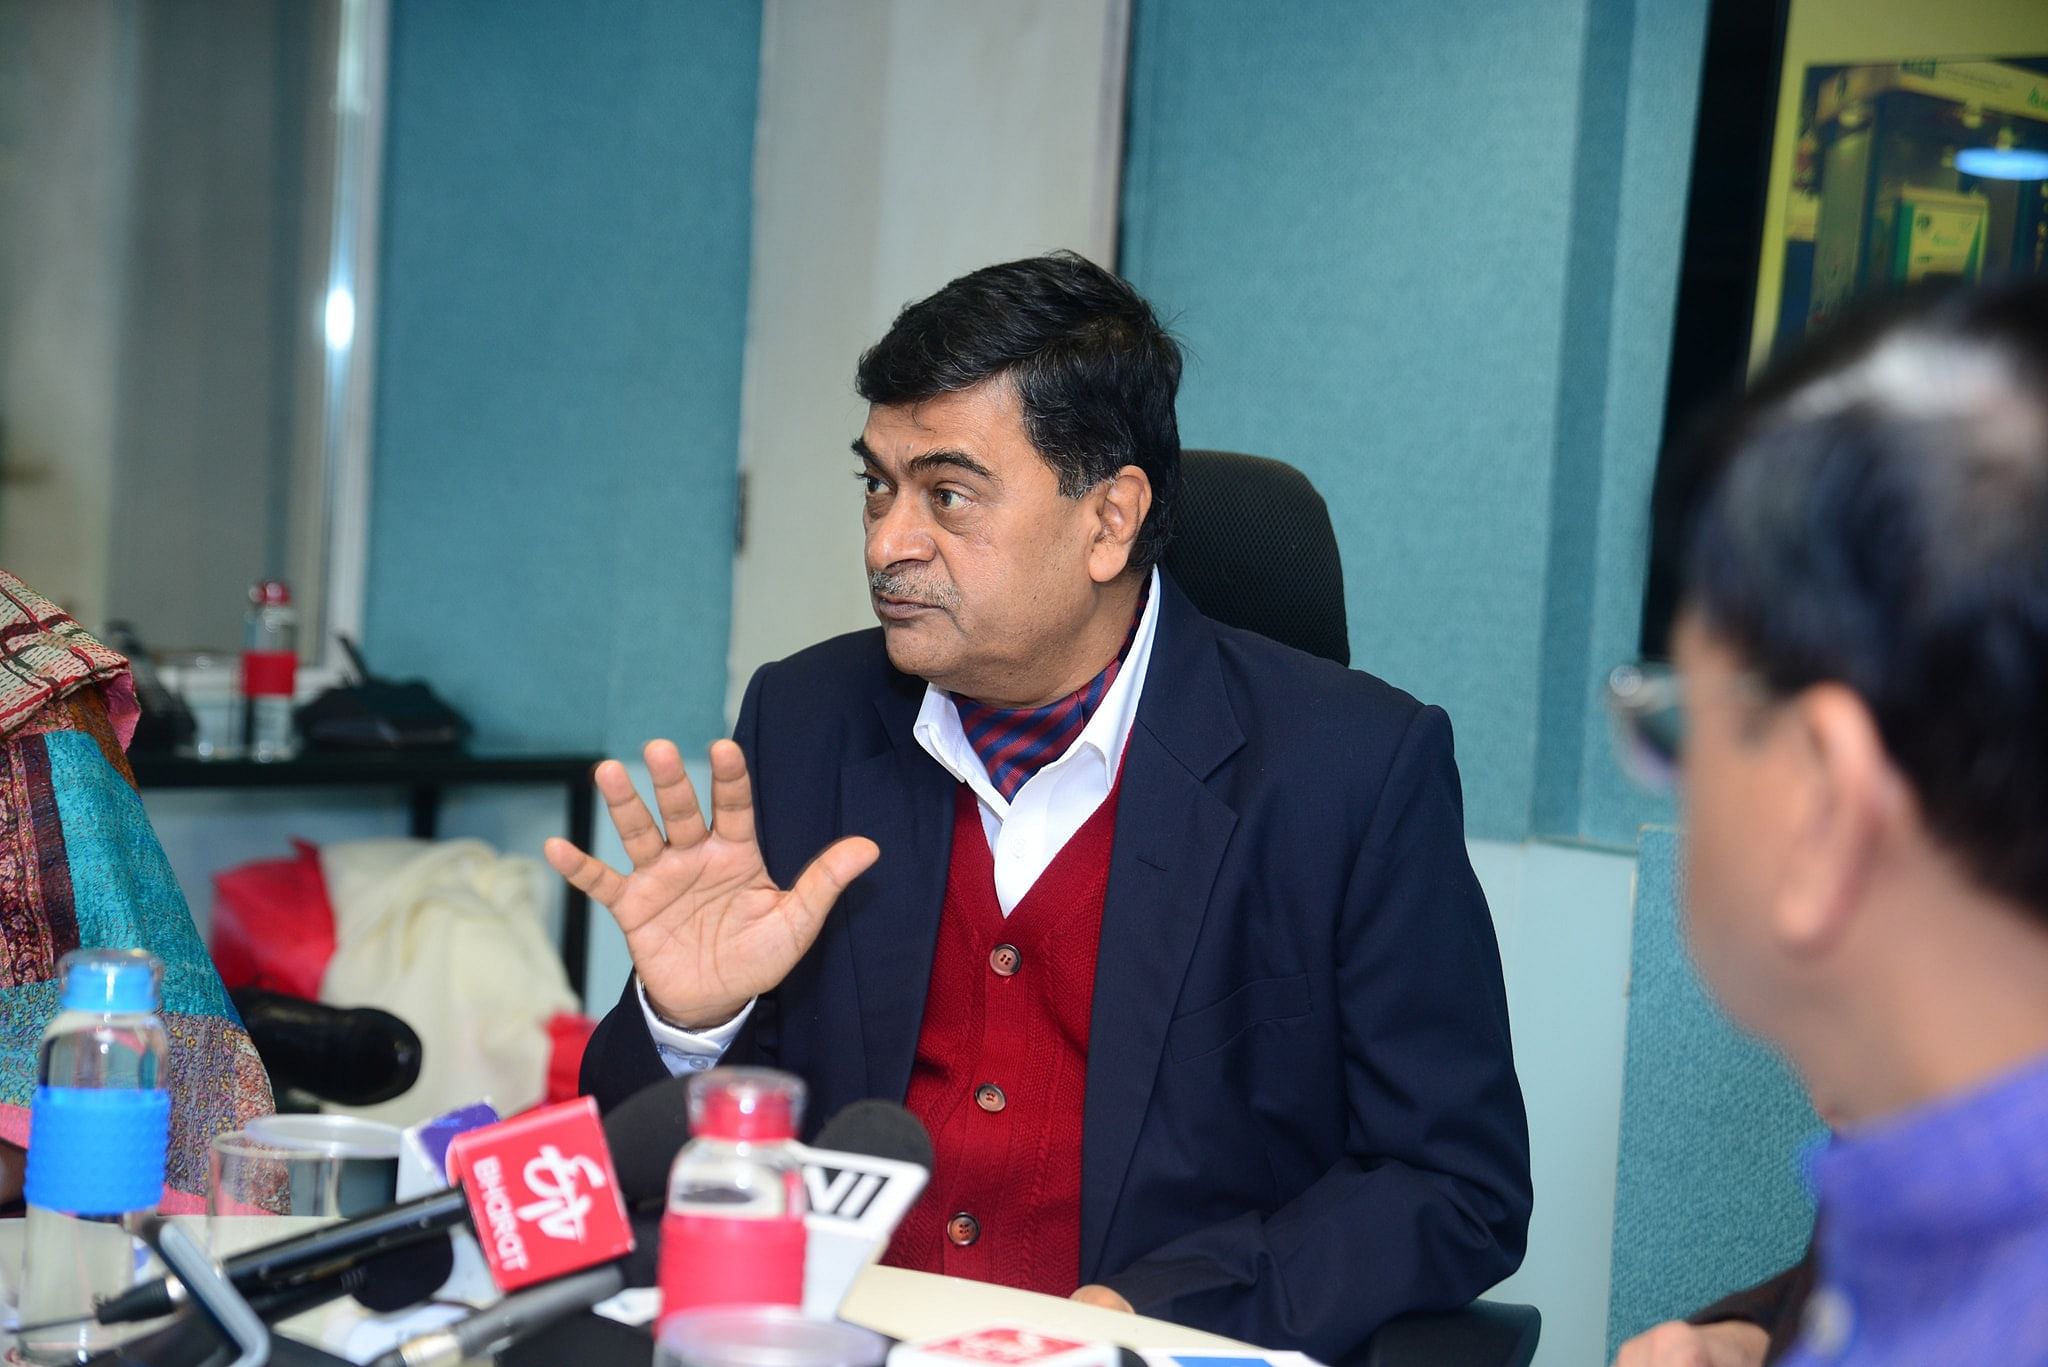  Union Power Minister R K Singh said if Goa identifies some sites for hydroelectricity projects in the Mahadayi basin, then the National Hydroelectric Power Corporation (NHPC) would look into its feasibility. Photo/Facebook (RajKumarSinghIndia)